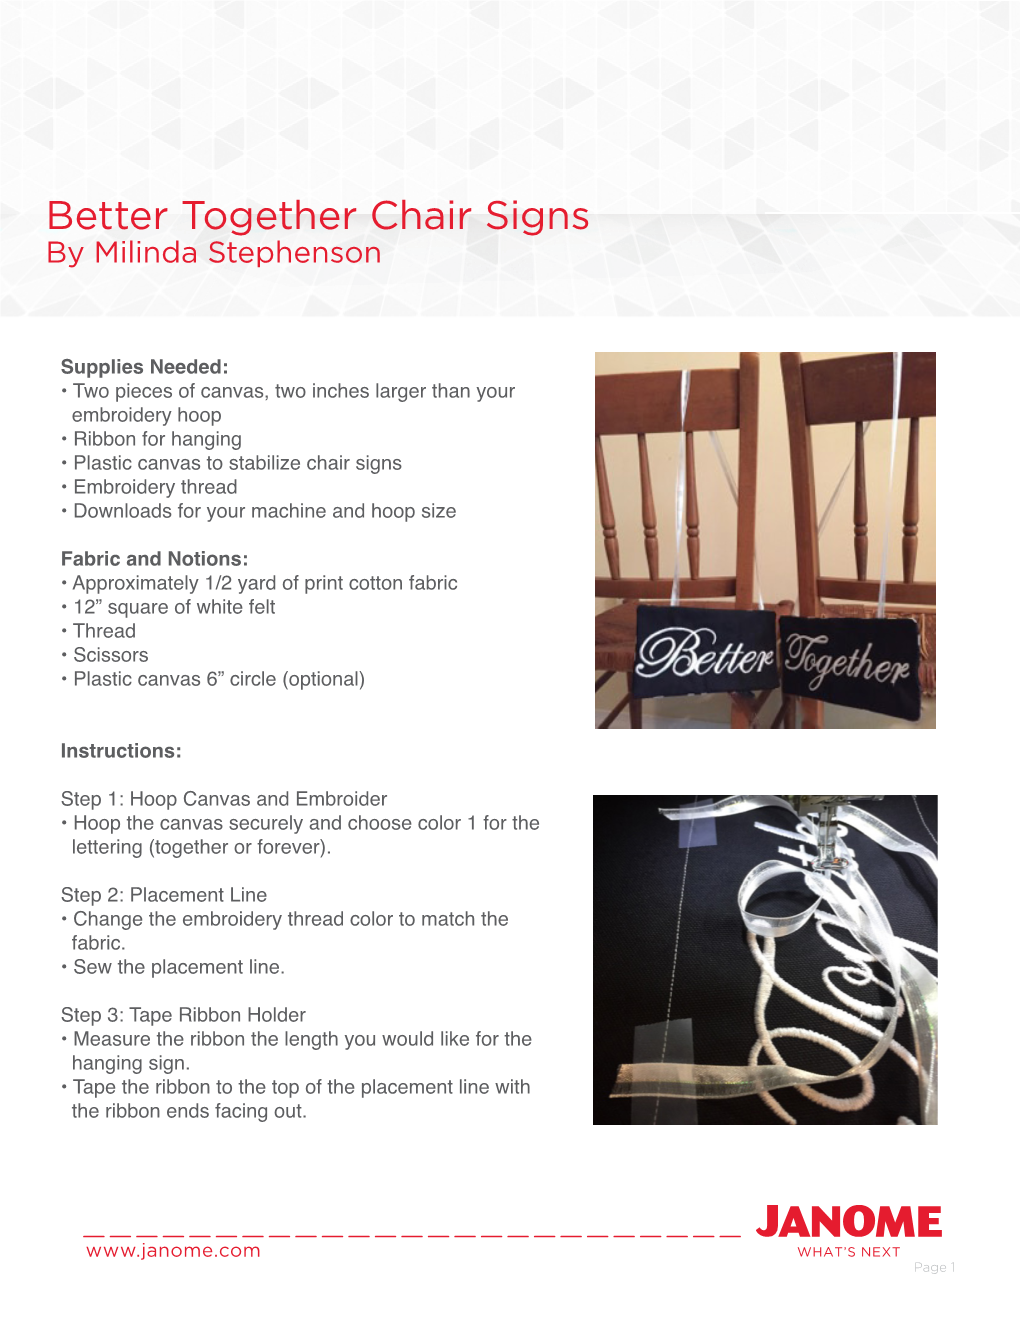 Better Together Chair Signs by Milinda Stephenson